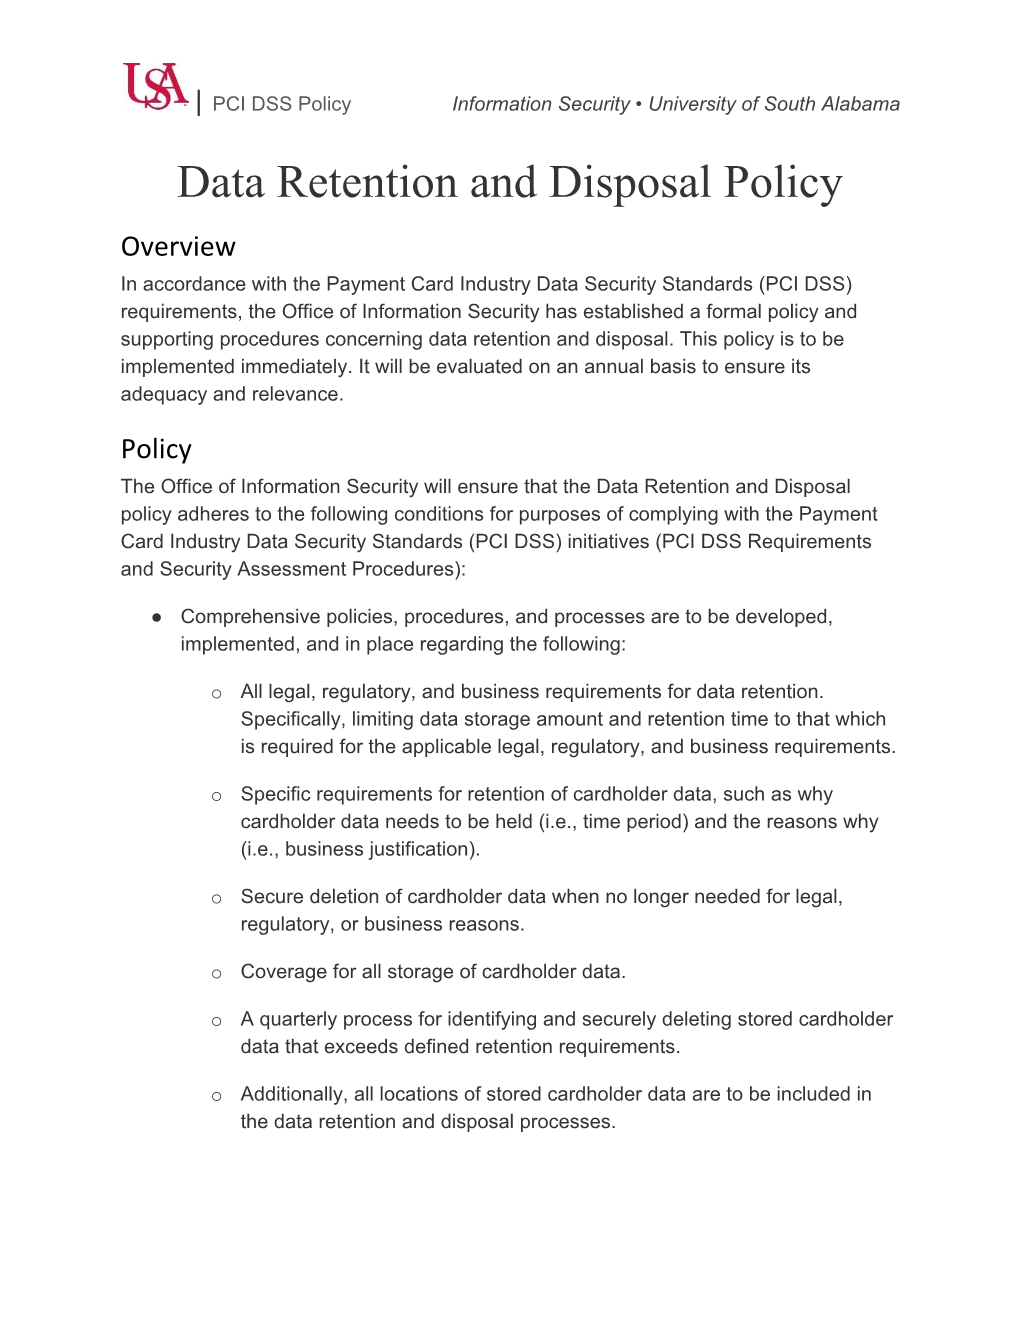 Data Retention and Disposal Policy